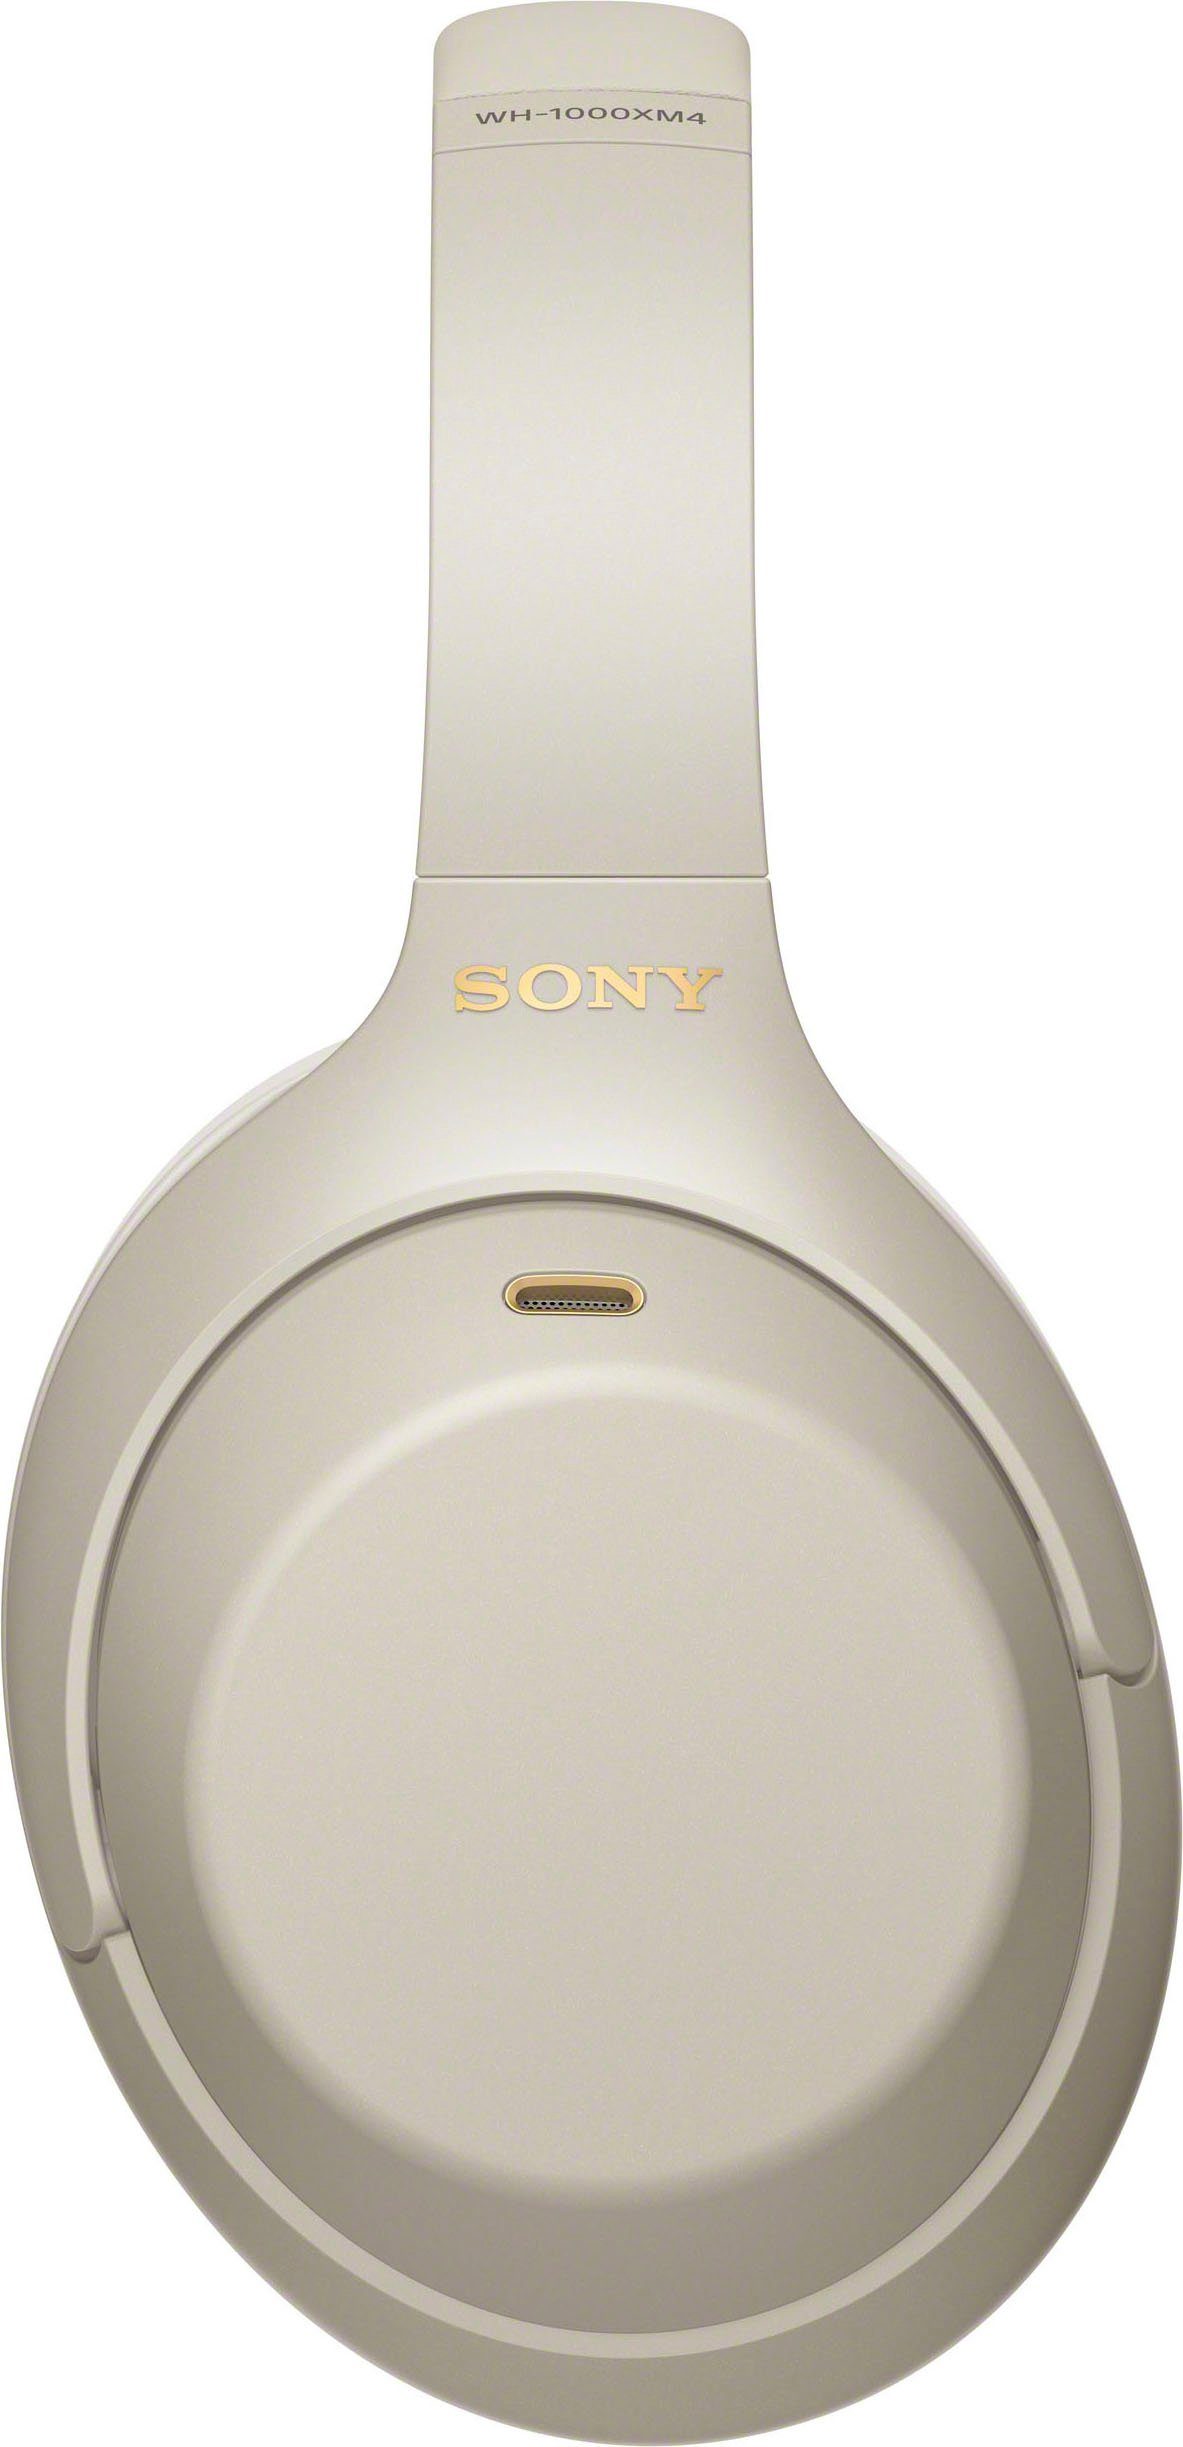 Sony WH-1000XM4 kabelloser NFC, Touch Silber via Bluetooth, NFC, Verbindung Sensor, Over-Ear-Kopfhörer Schnellladefunktion) (Noise-Cancelling, One-Touch